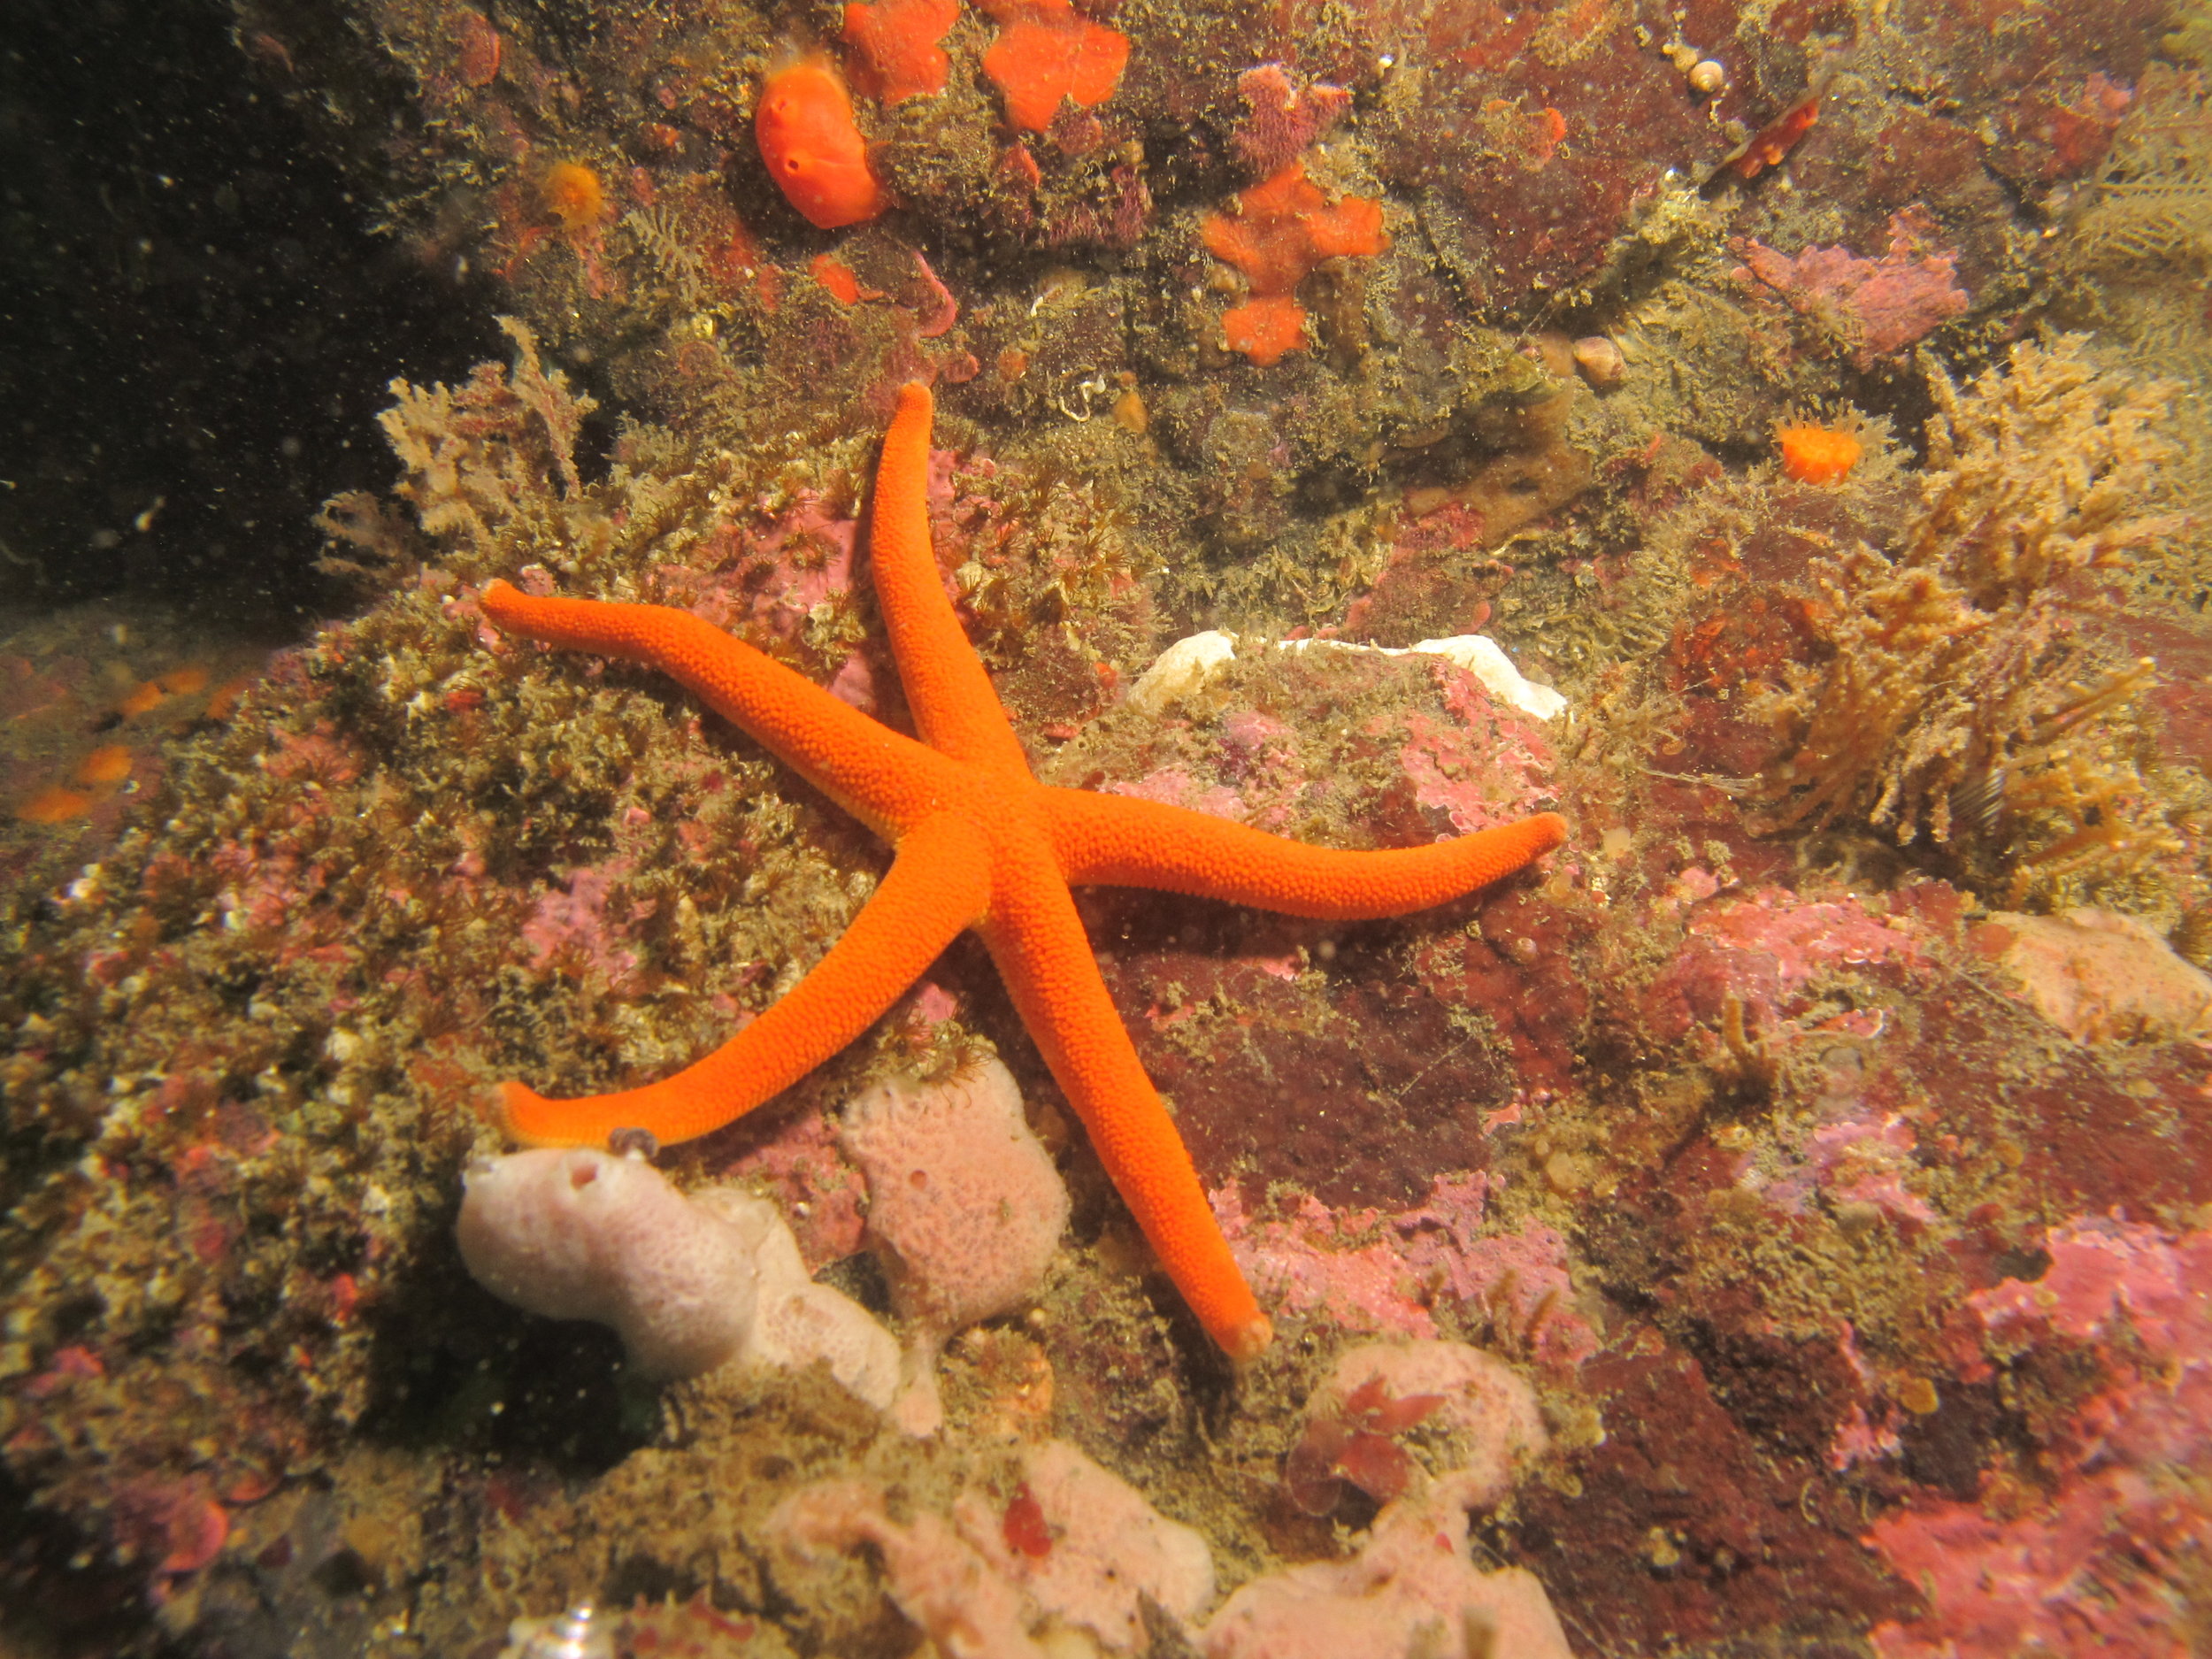 Blood sea stars were not as severely impacted